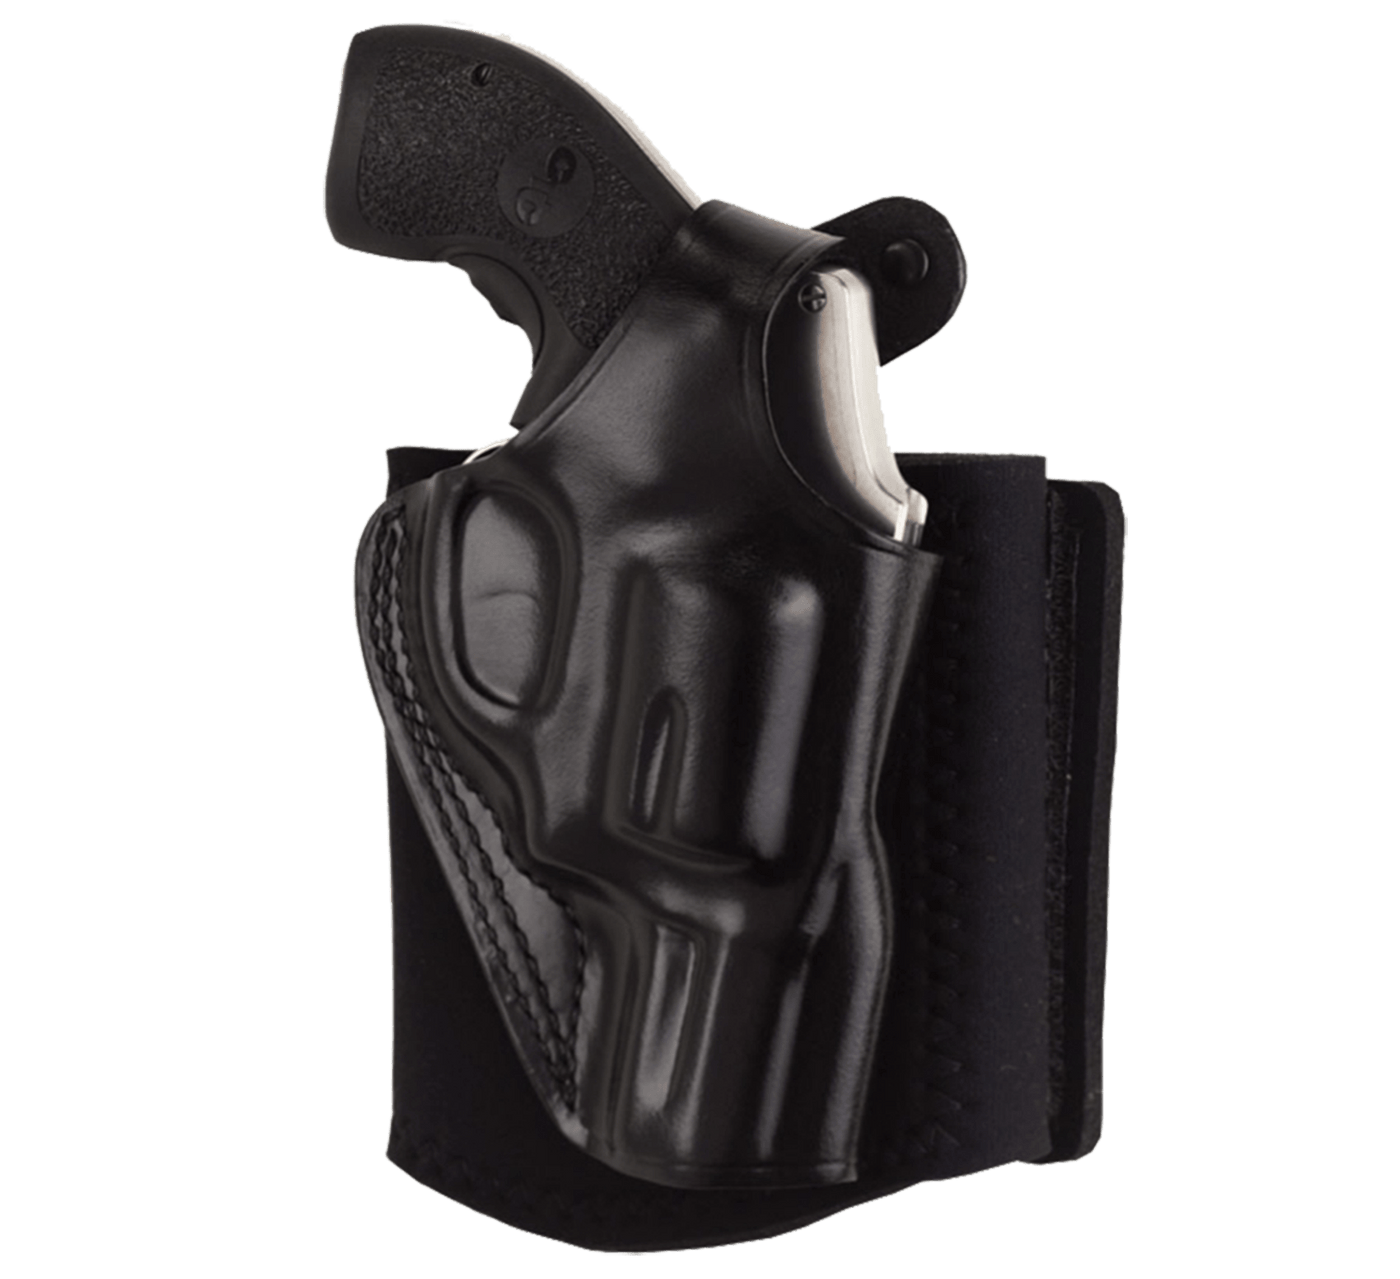 Galco Galco Ankle Glove Holster Rh - Leather Sig P365 Black Holsters And Related Items